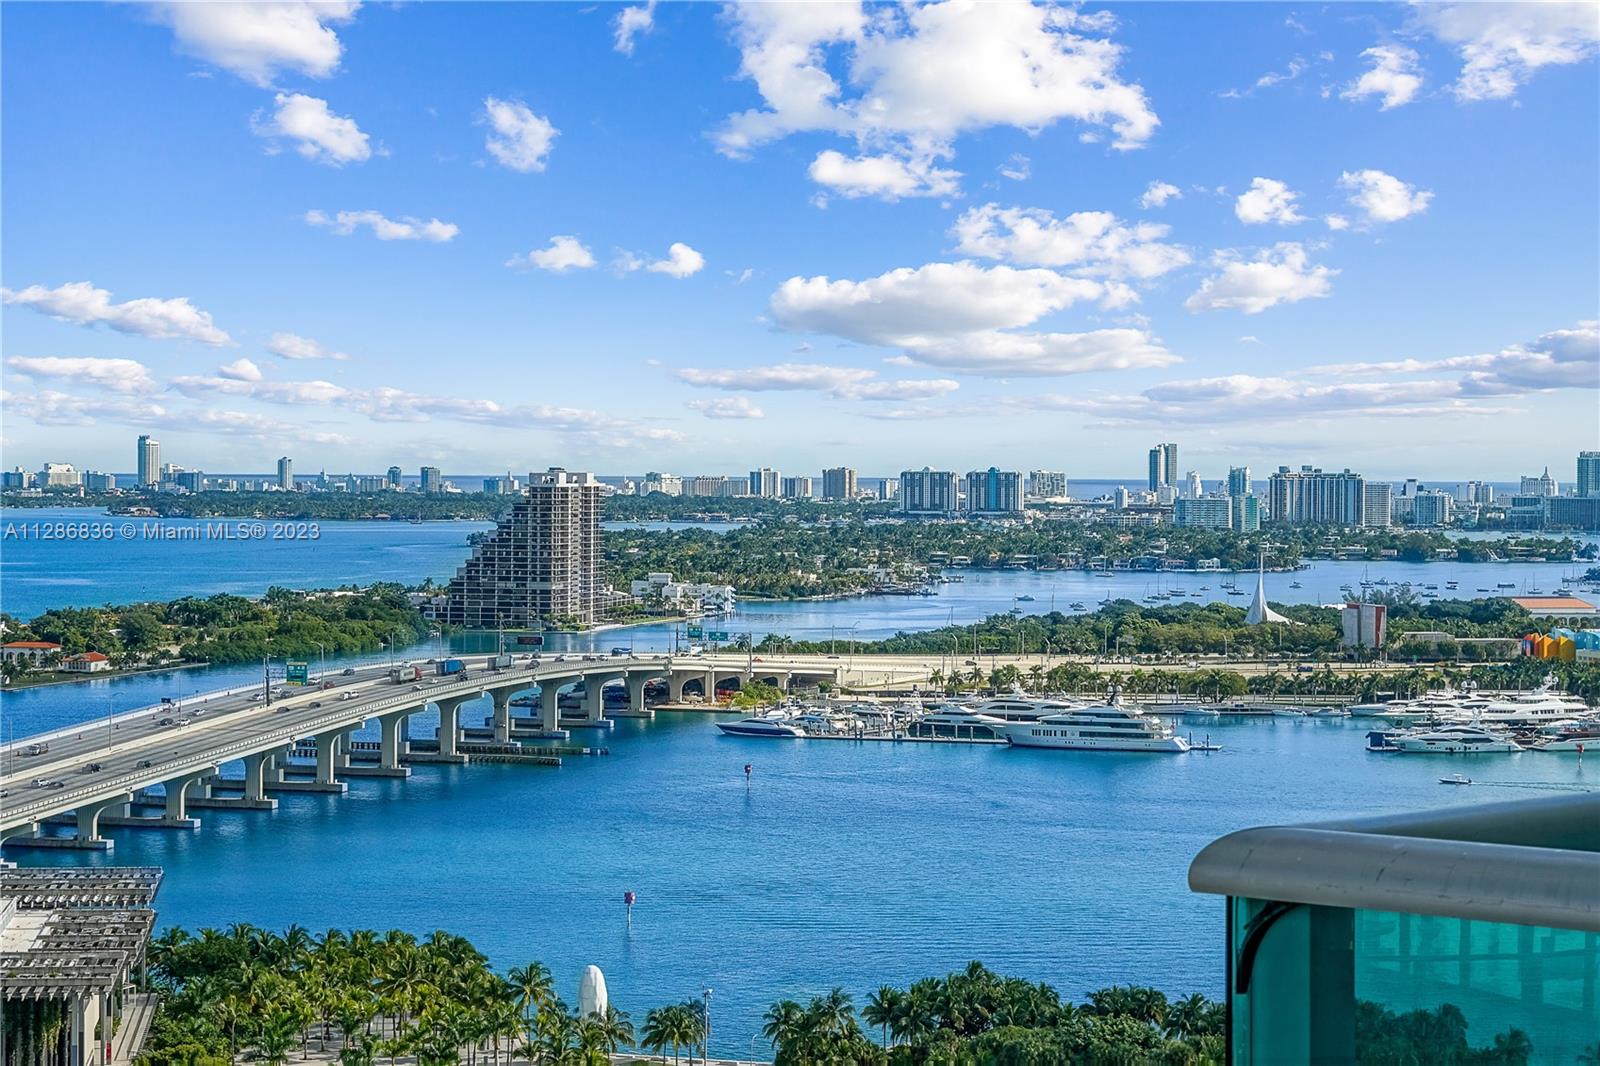 *** Click on Virtual Tour Link for Video Tour*** Firm price**Spacious 1 Bedroom condo with 2 full baths & a den at the 900 Biscayne Building located in downtown Miami. Enjoy over 200 sq ft of outdoor space from any one of your TWO private balconies. Wake up to sweeping sunrise views over the Miami Beach skyline & across  relaxing waters of Biscayne Bay. This condo features porcelain floors throughout, sub-zero & Miele appliances in the kitchen, built-in closets & much more. 900 Biscayne offers 5-Star amenities 24/7 concierge, Valet, 2 swimming pools, whirlpool spa, observation deck with panoramic city & bay views. Walking distance to museums, performing arts university Commuter friendly location within multiple modes of transportation available. Hurry as prices are on the rise.